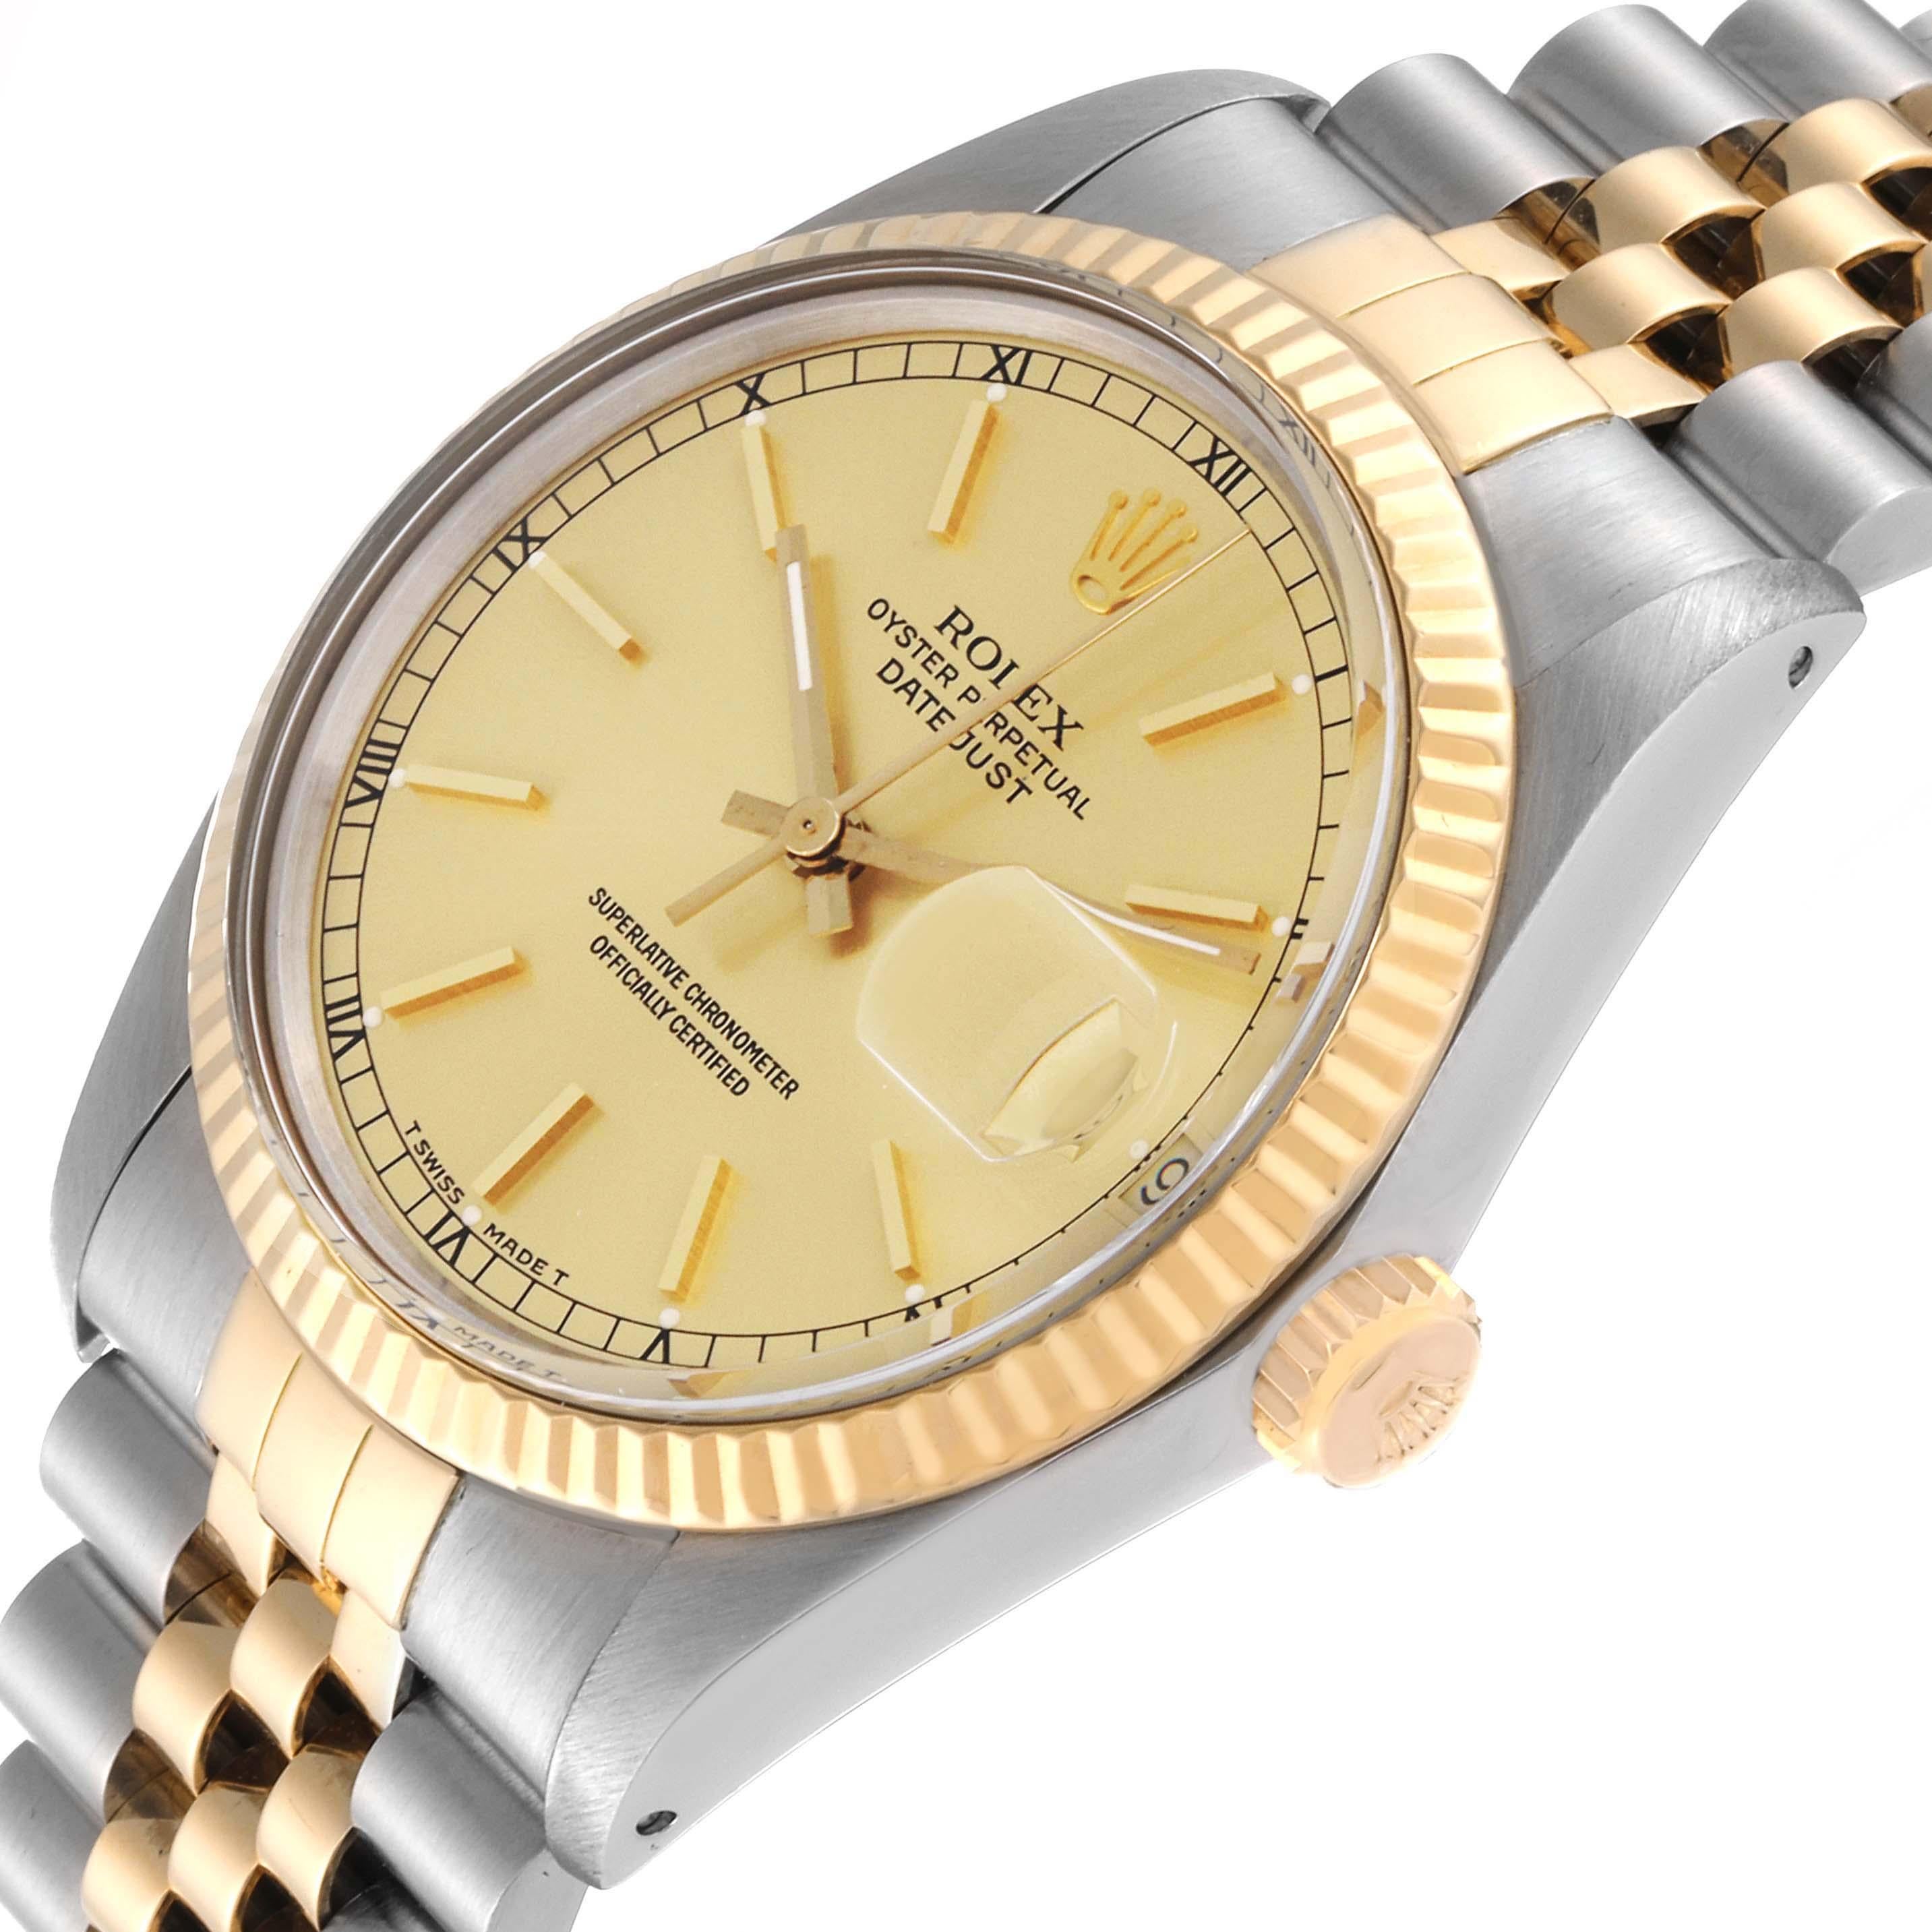 Rolex Datejust Steel Yellow Gold Vintage Mens Watch 16013 Box Card For Sale 1